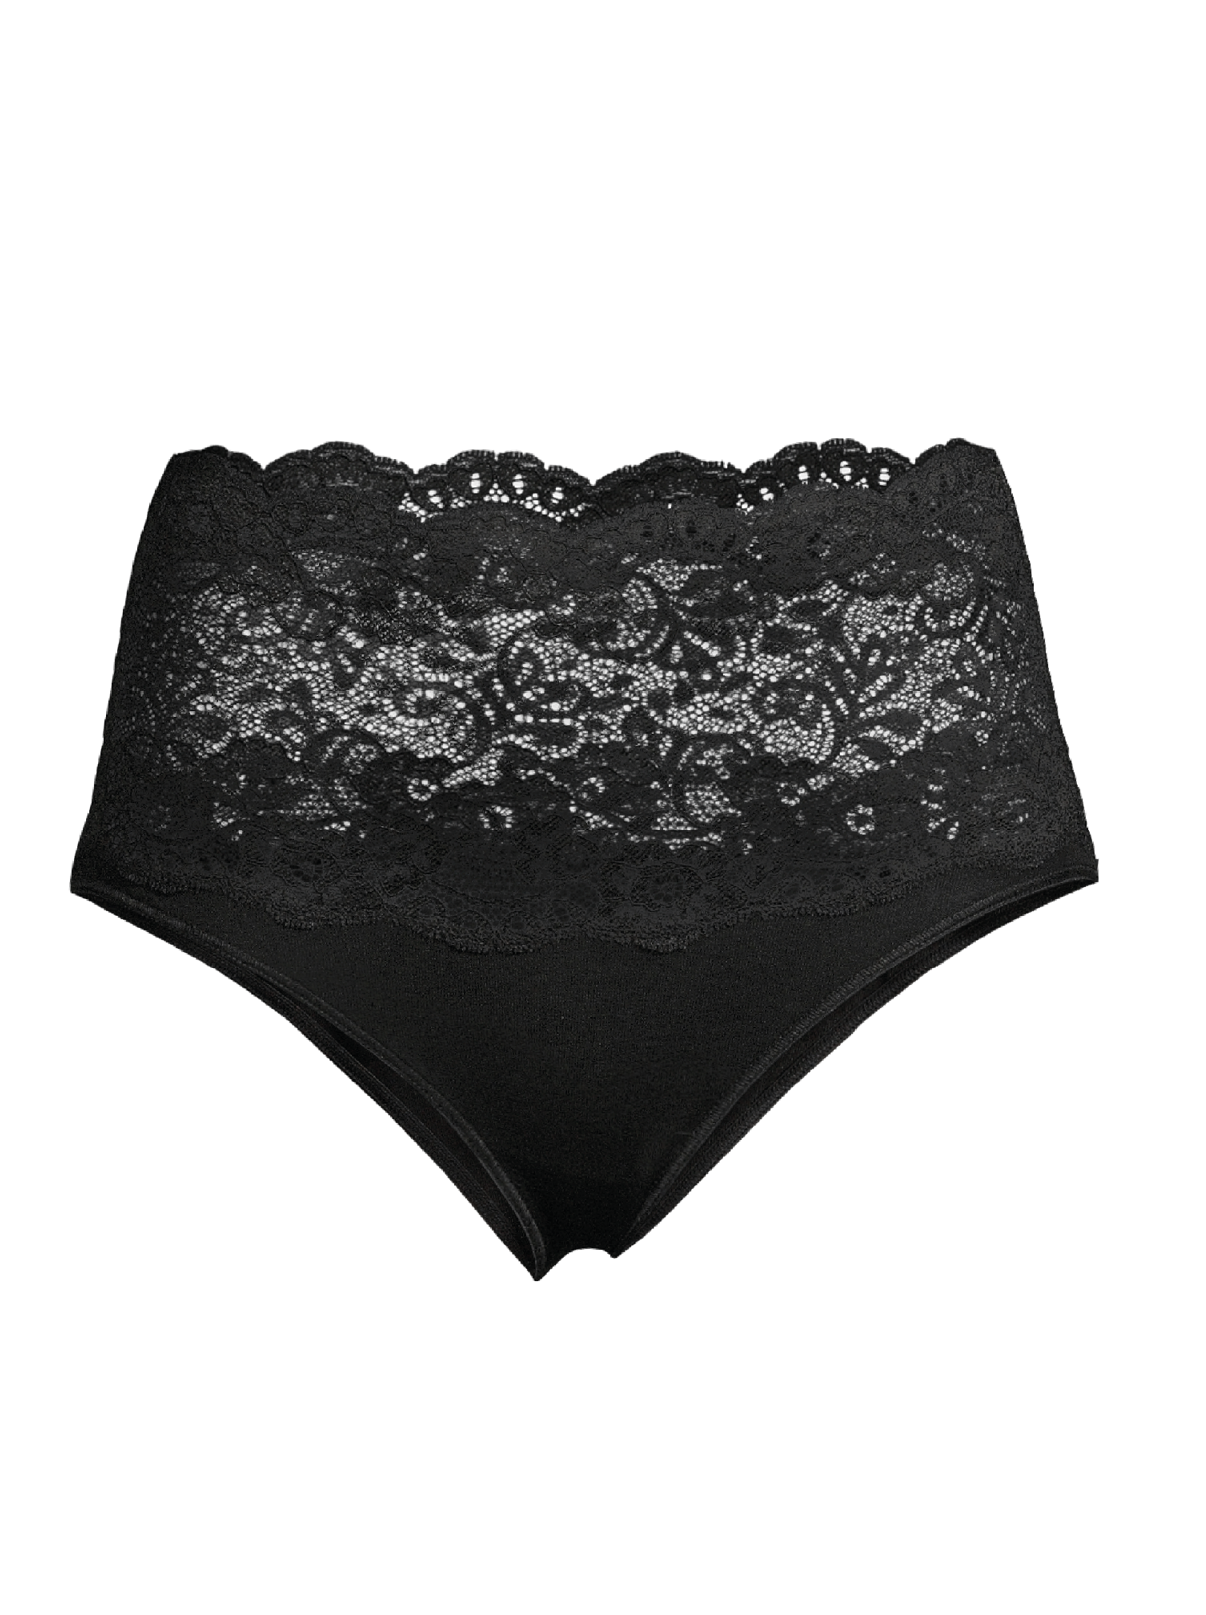 Woman Black Briefs in cotton with leavers lace